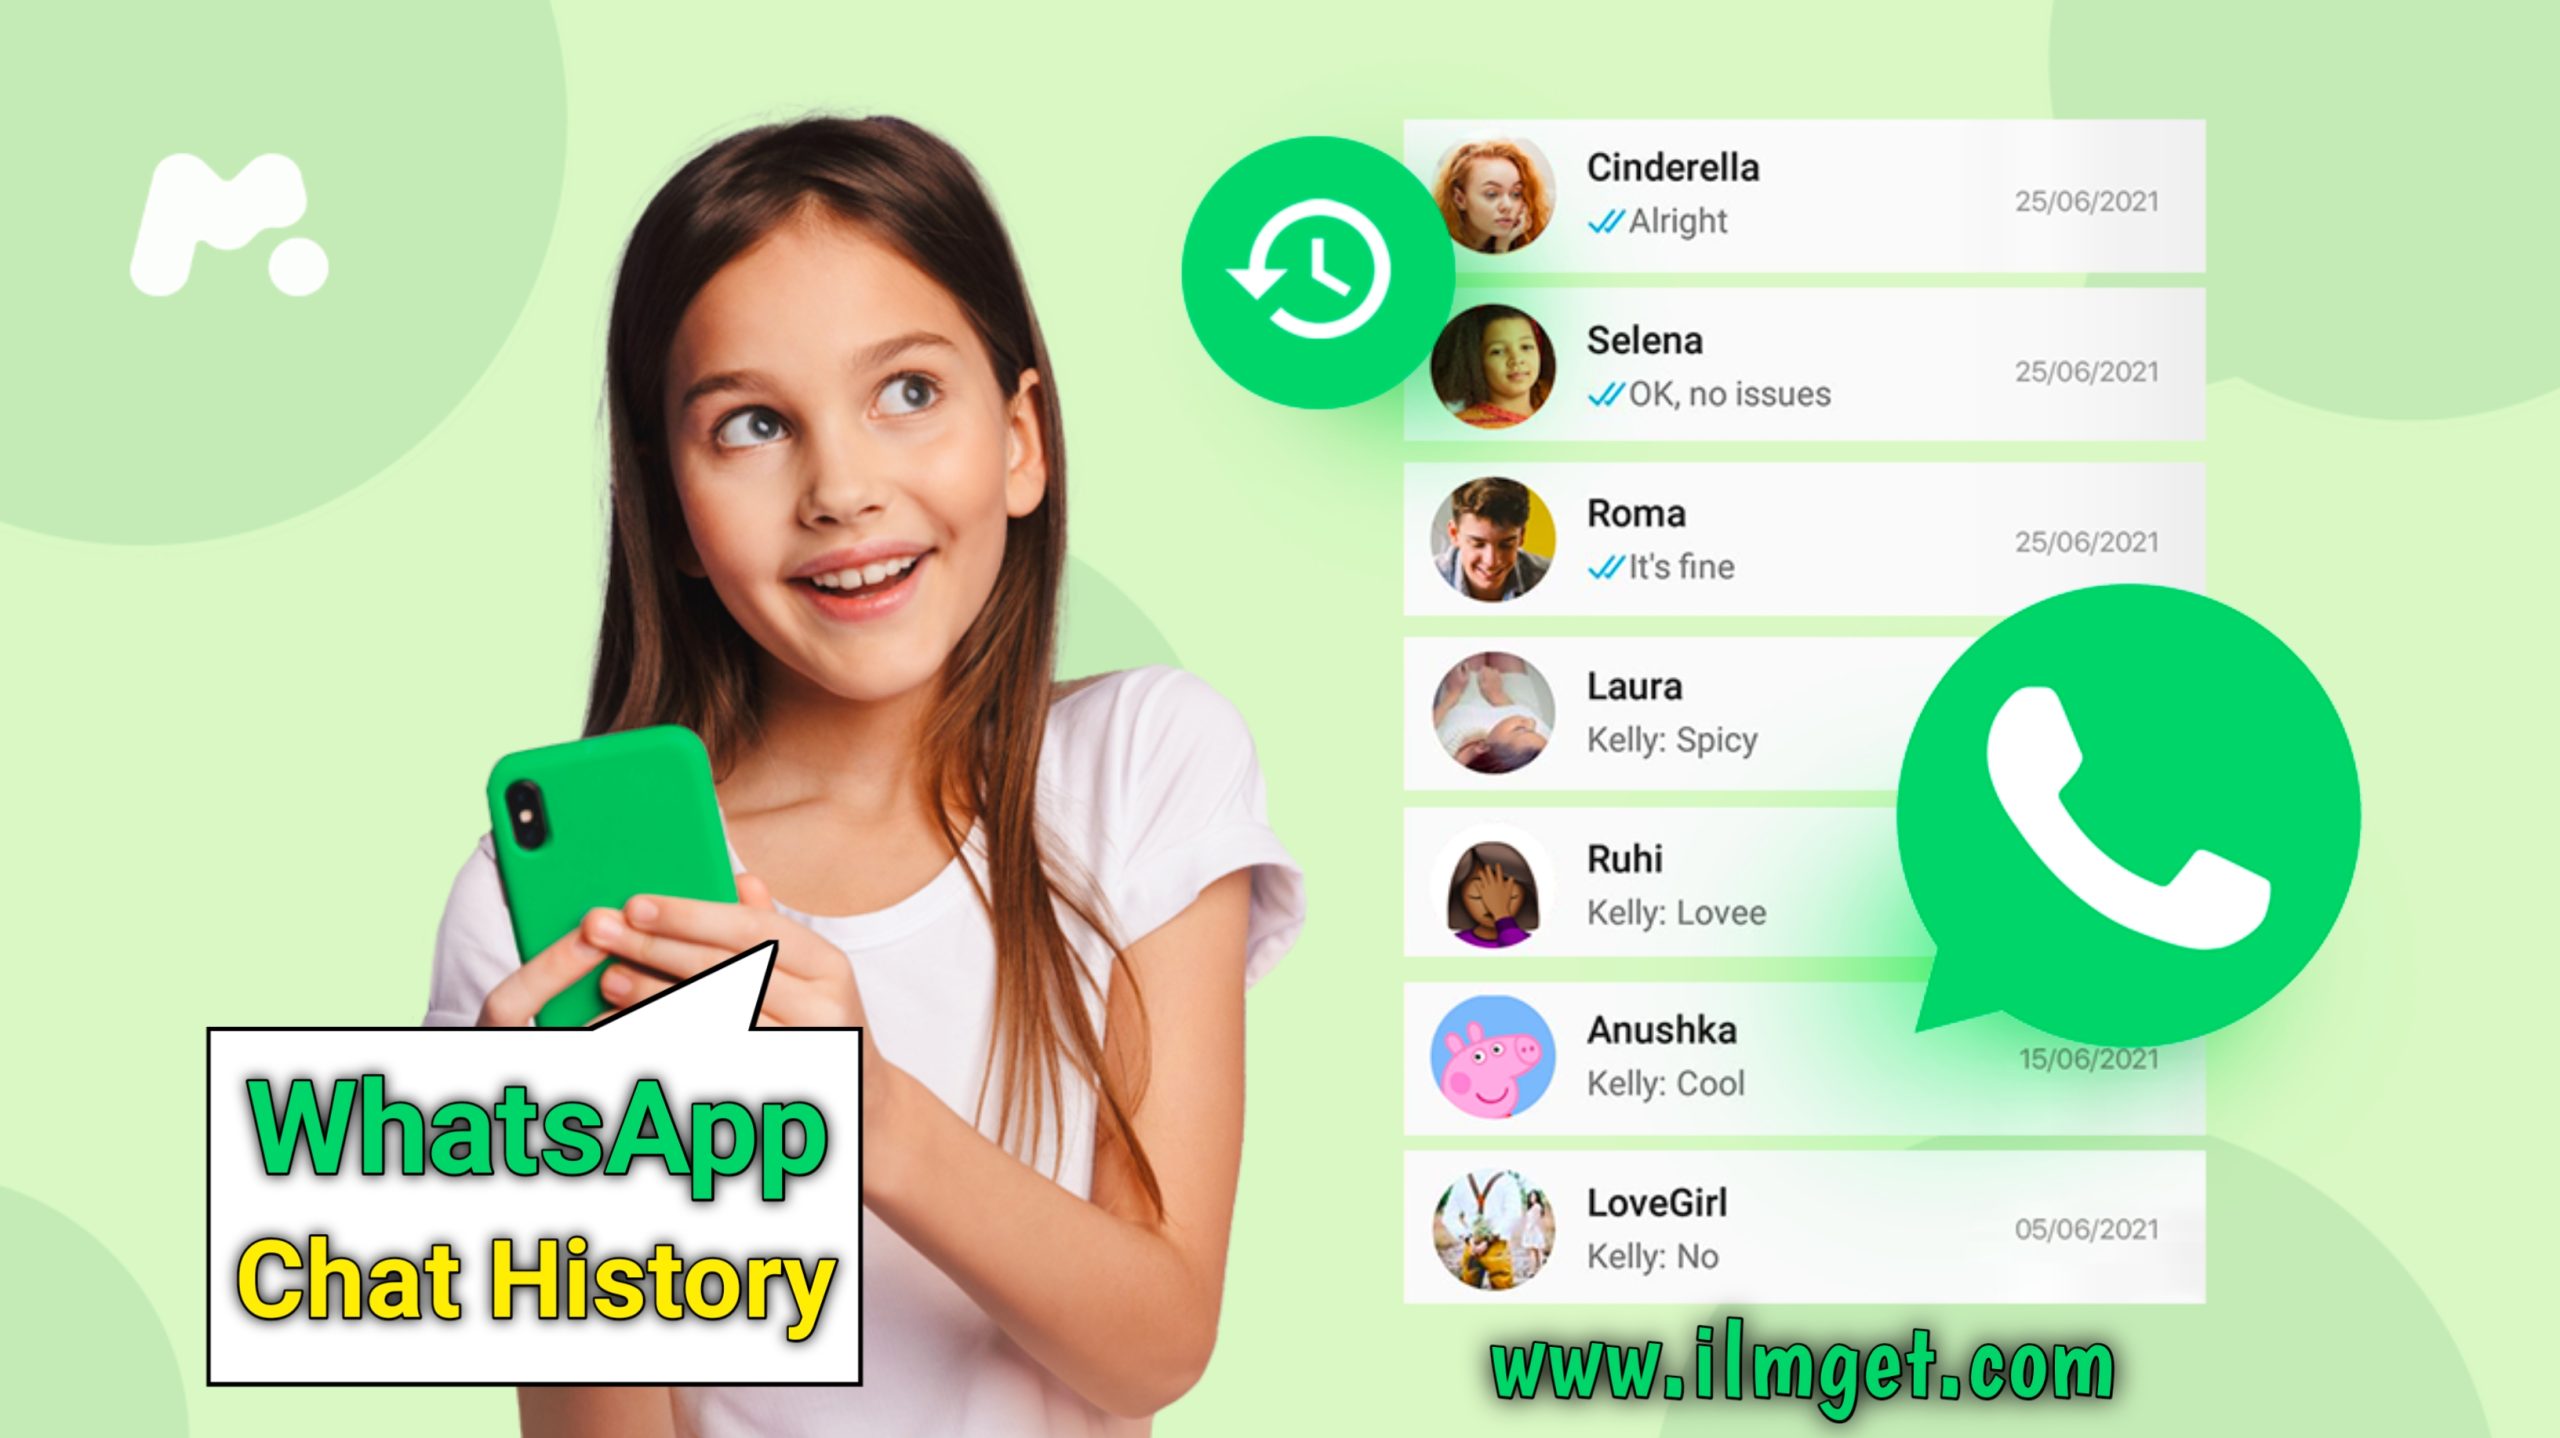 How to Check Your WhatsApp Chat History and All Details